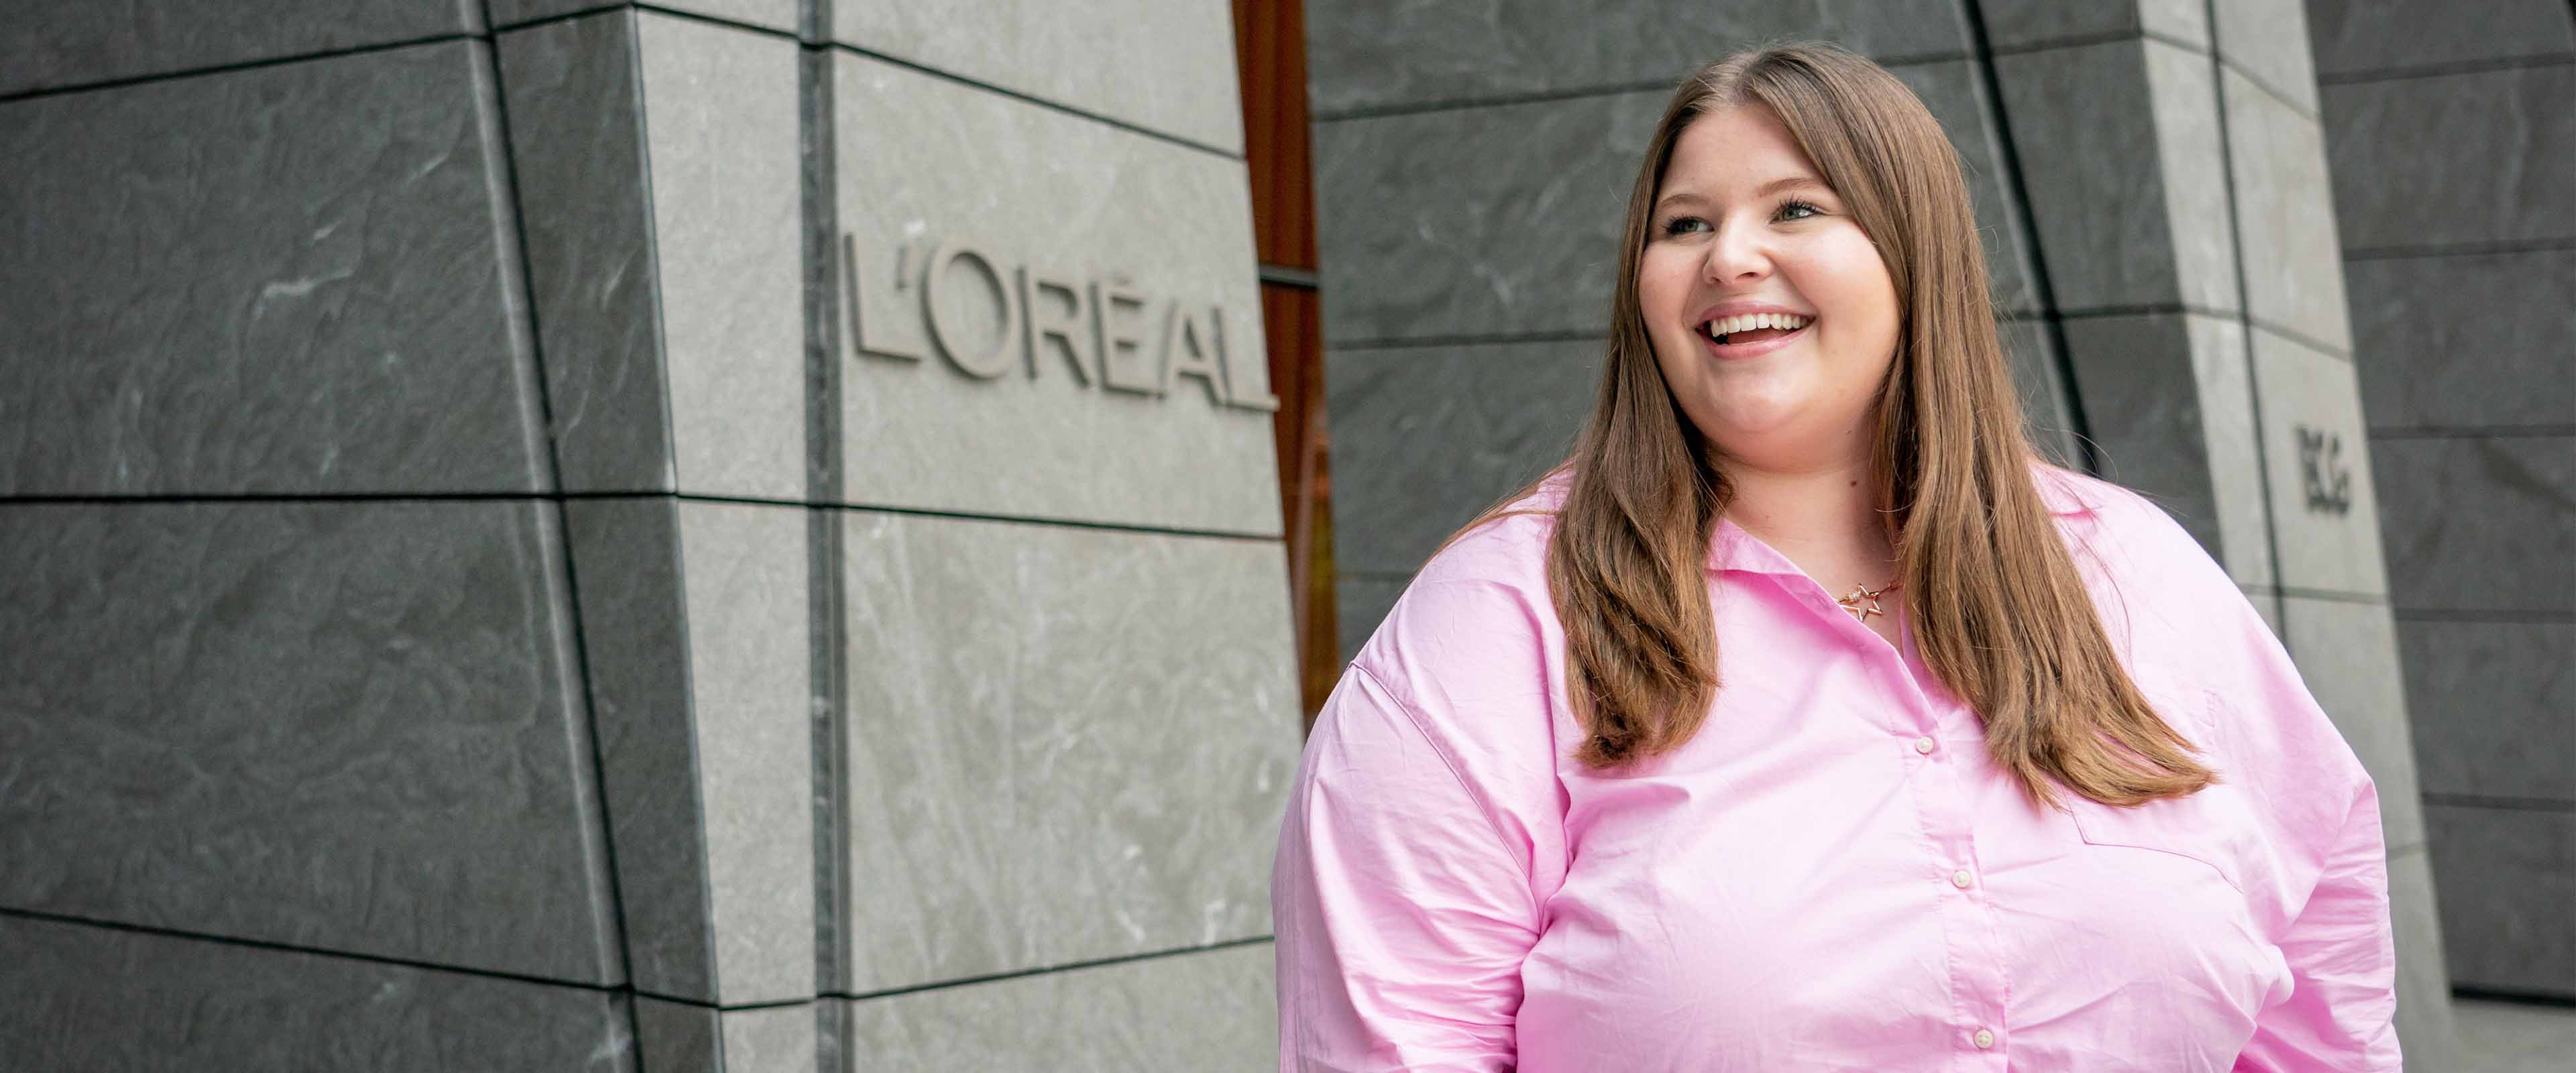 Samantha Morehead standing outside the L'Oreal building in New York City.